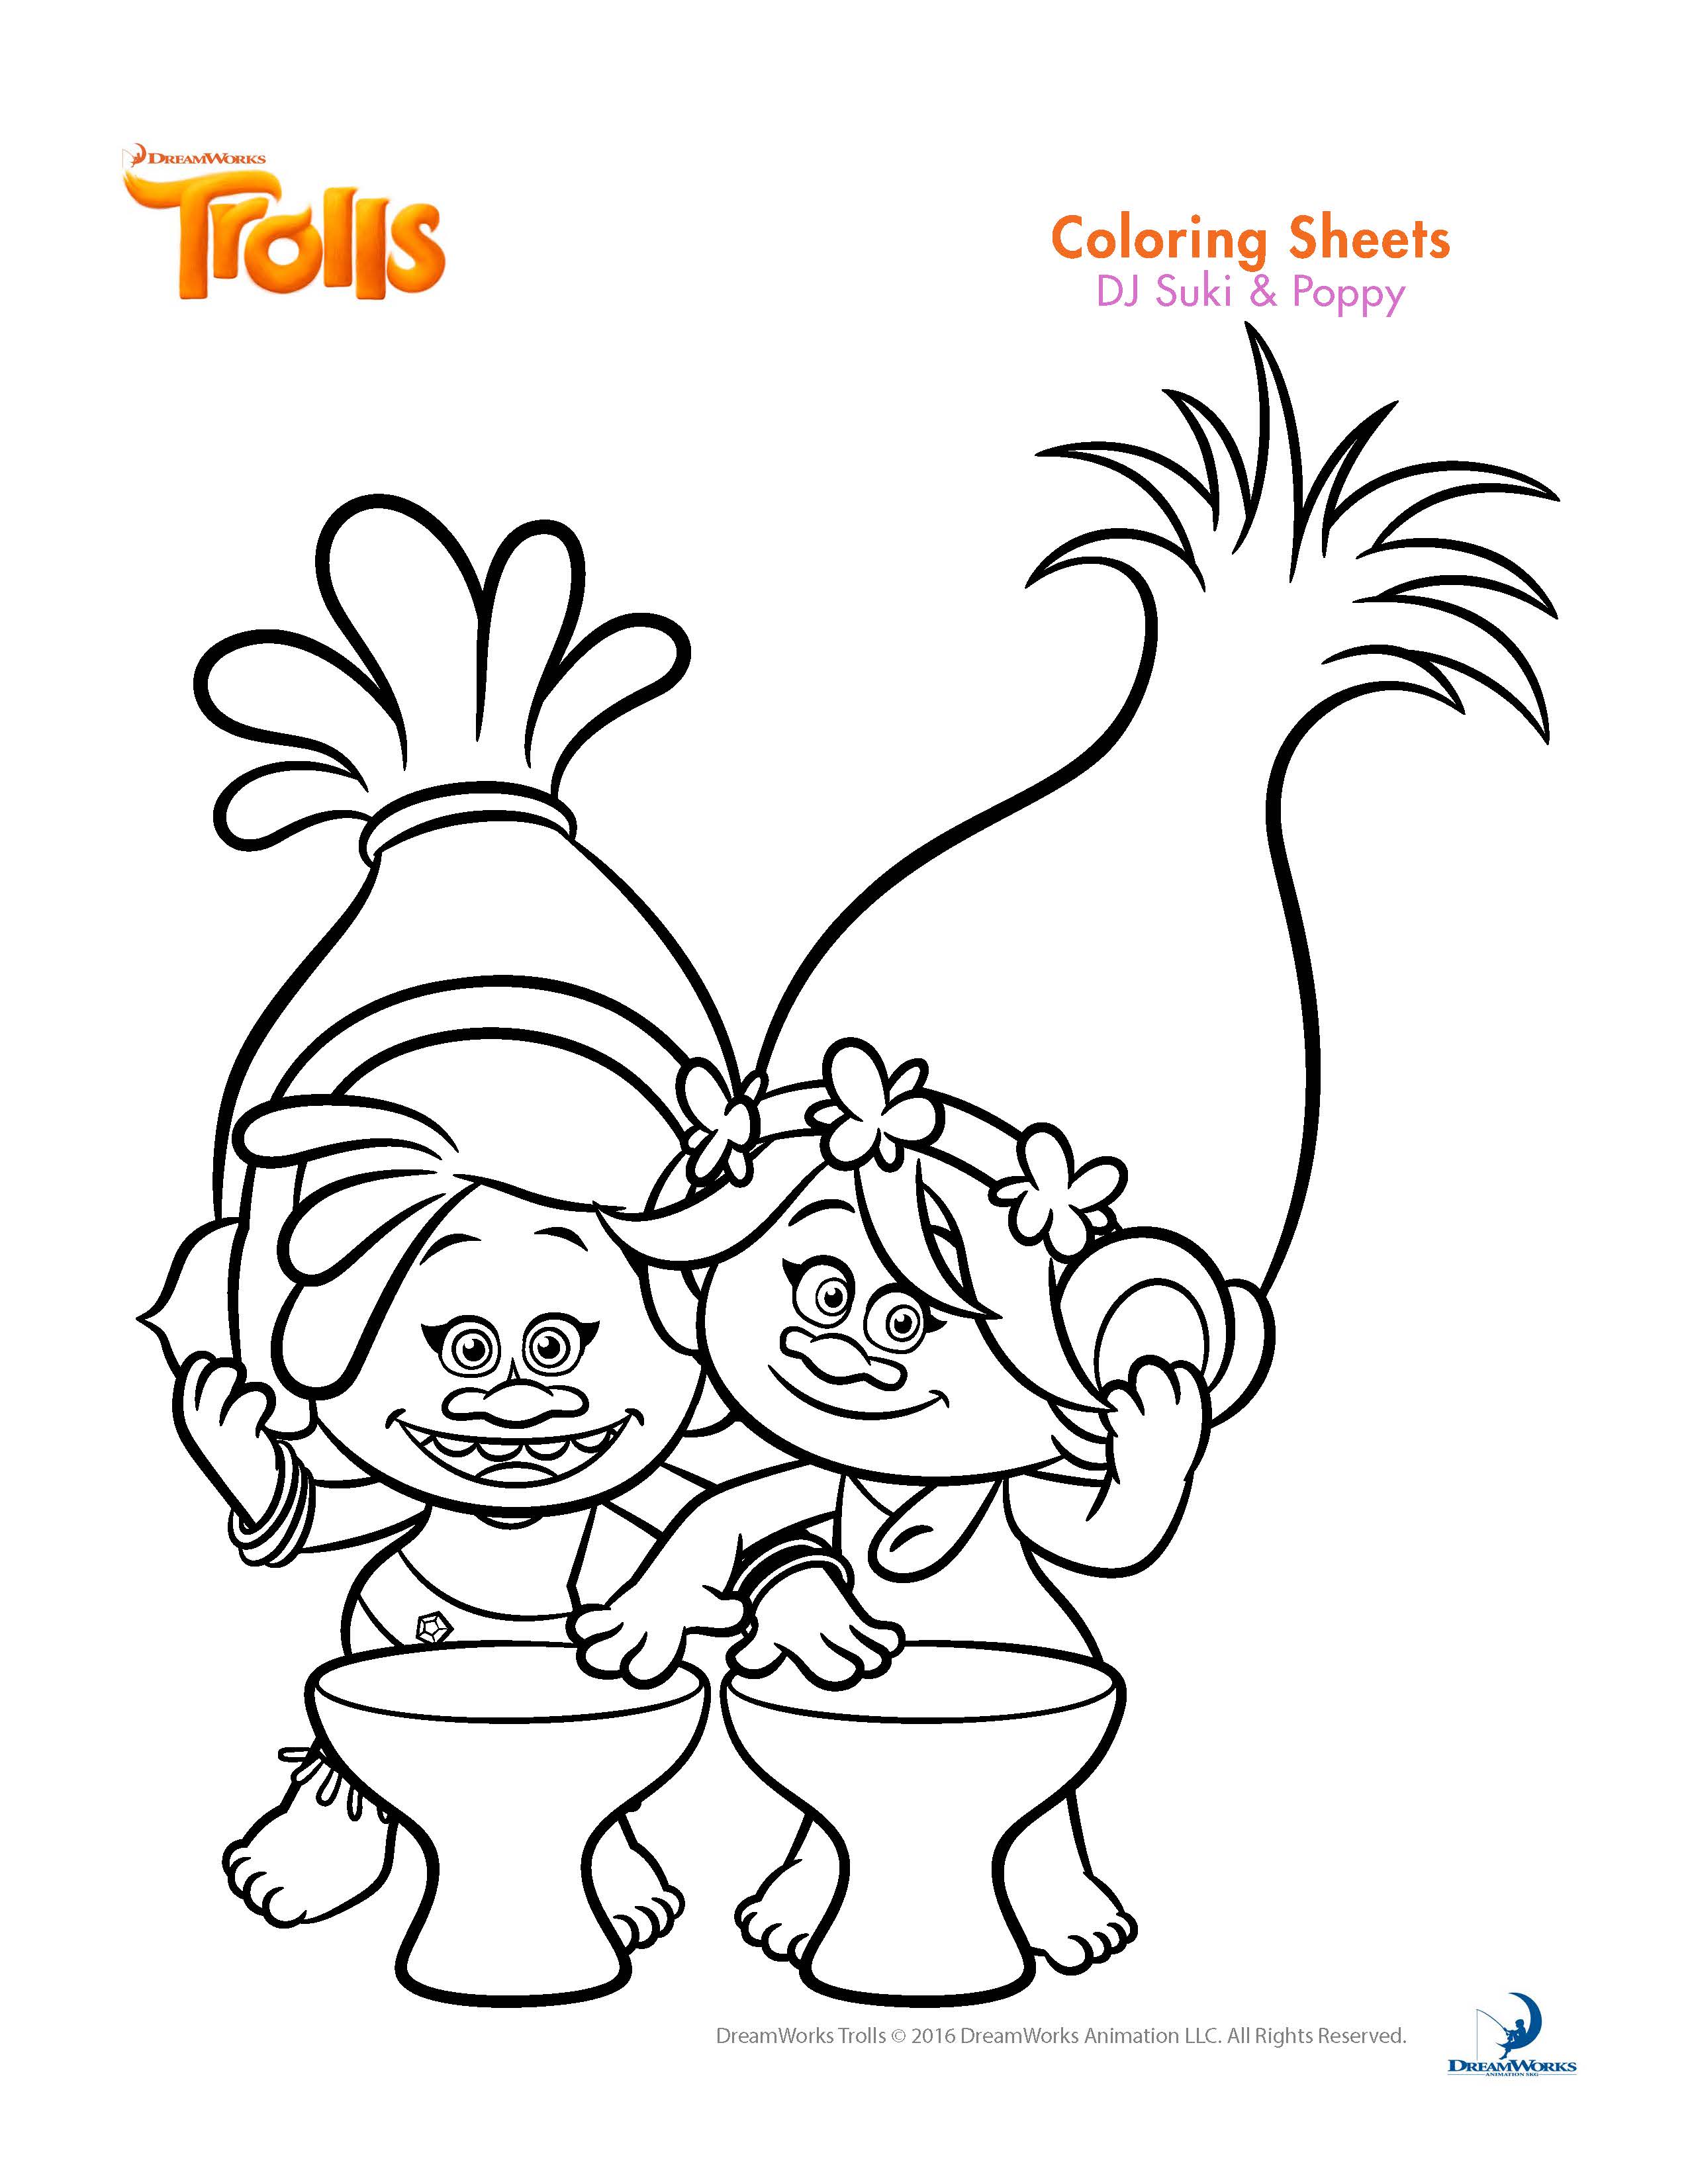 Trolls coloring sheets and printable activity sheets and a movie ...